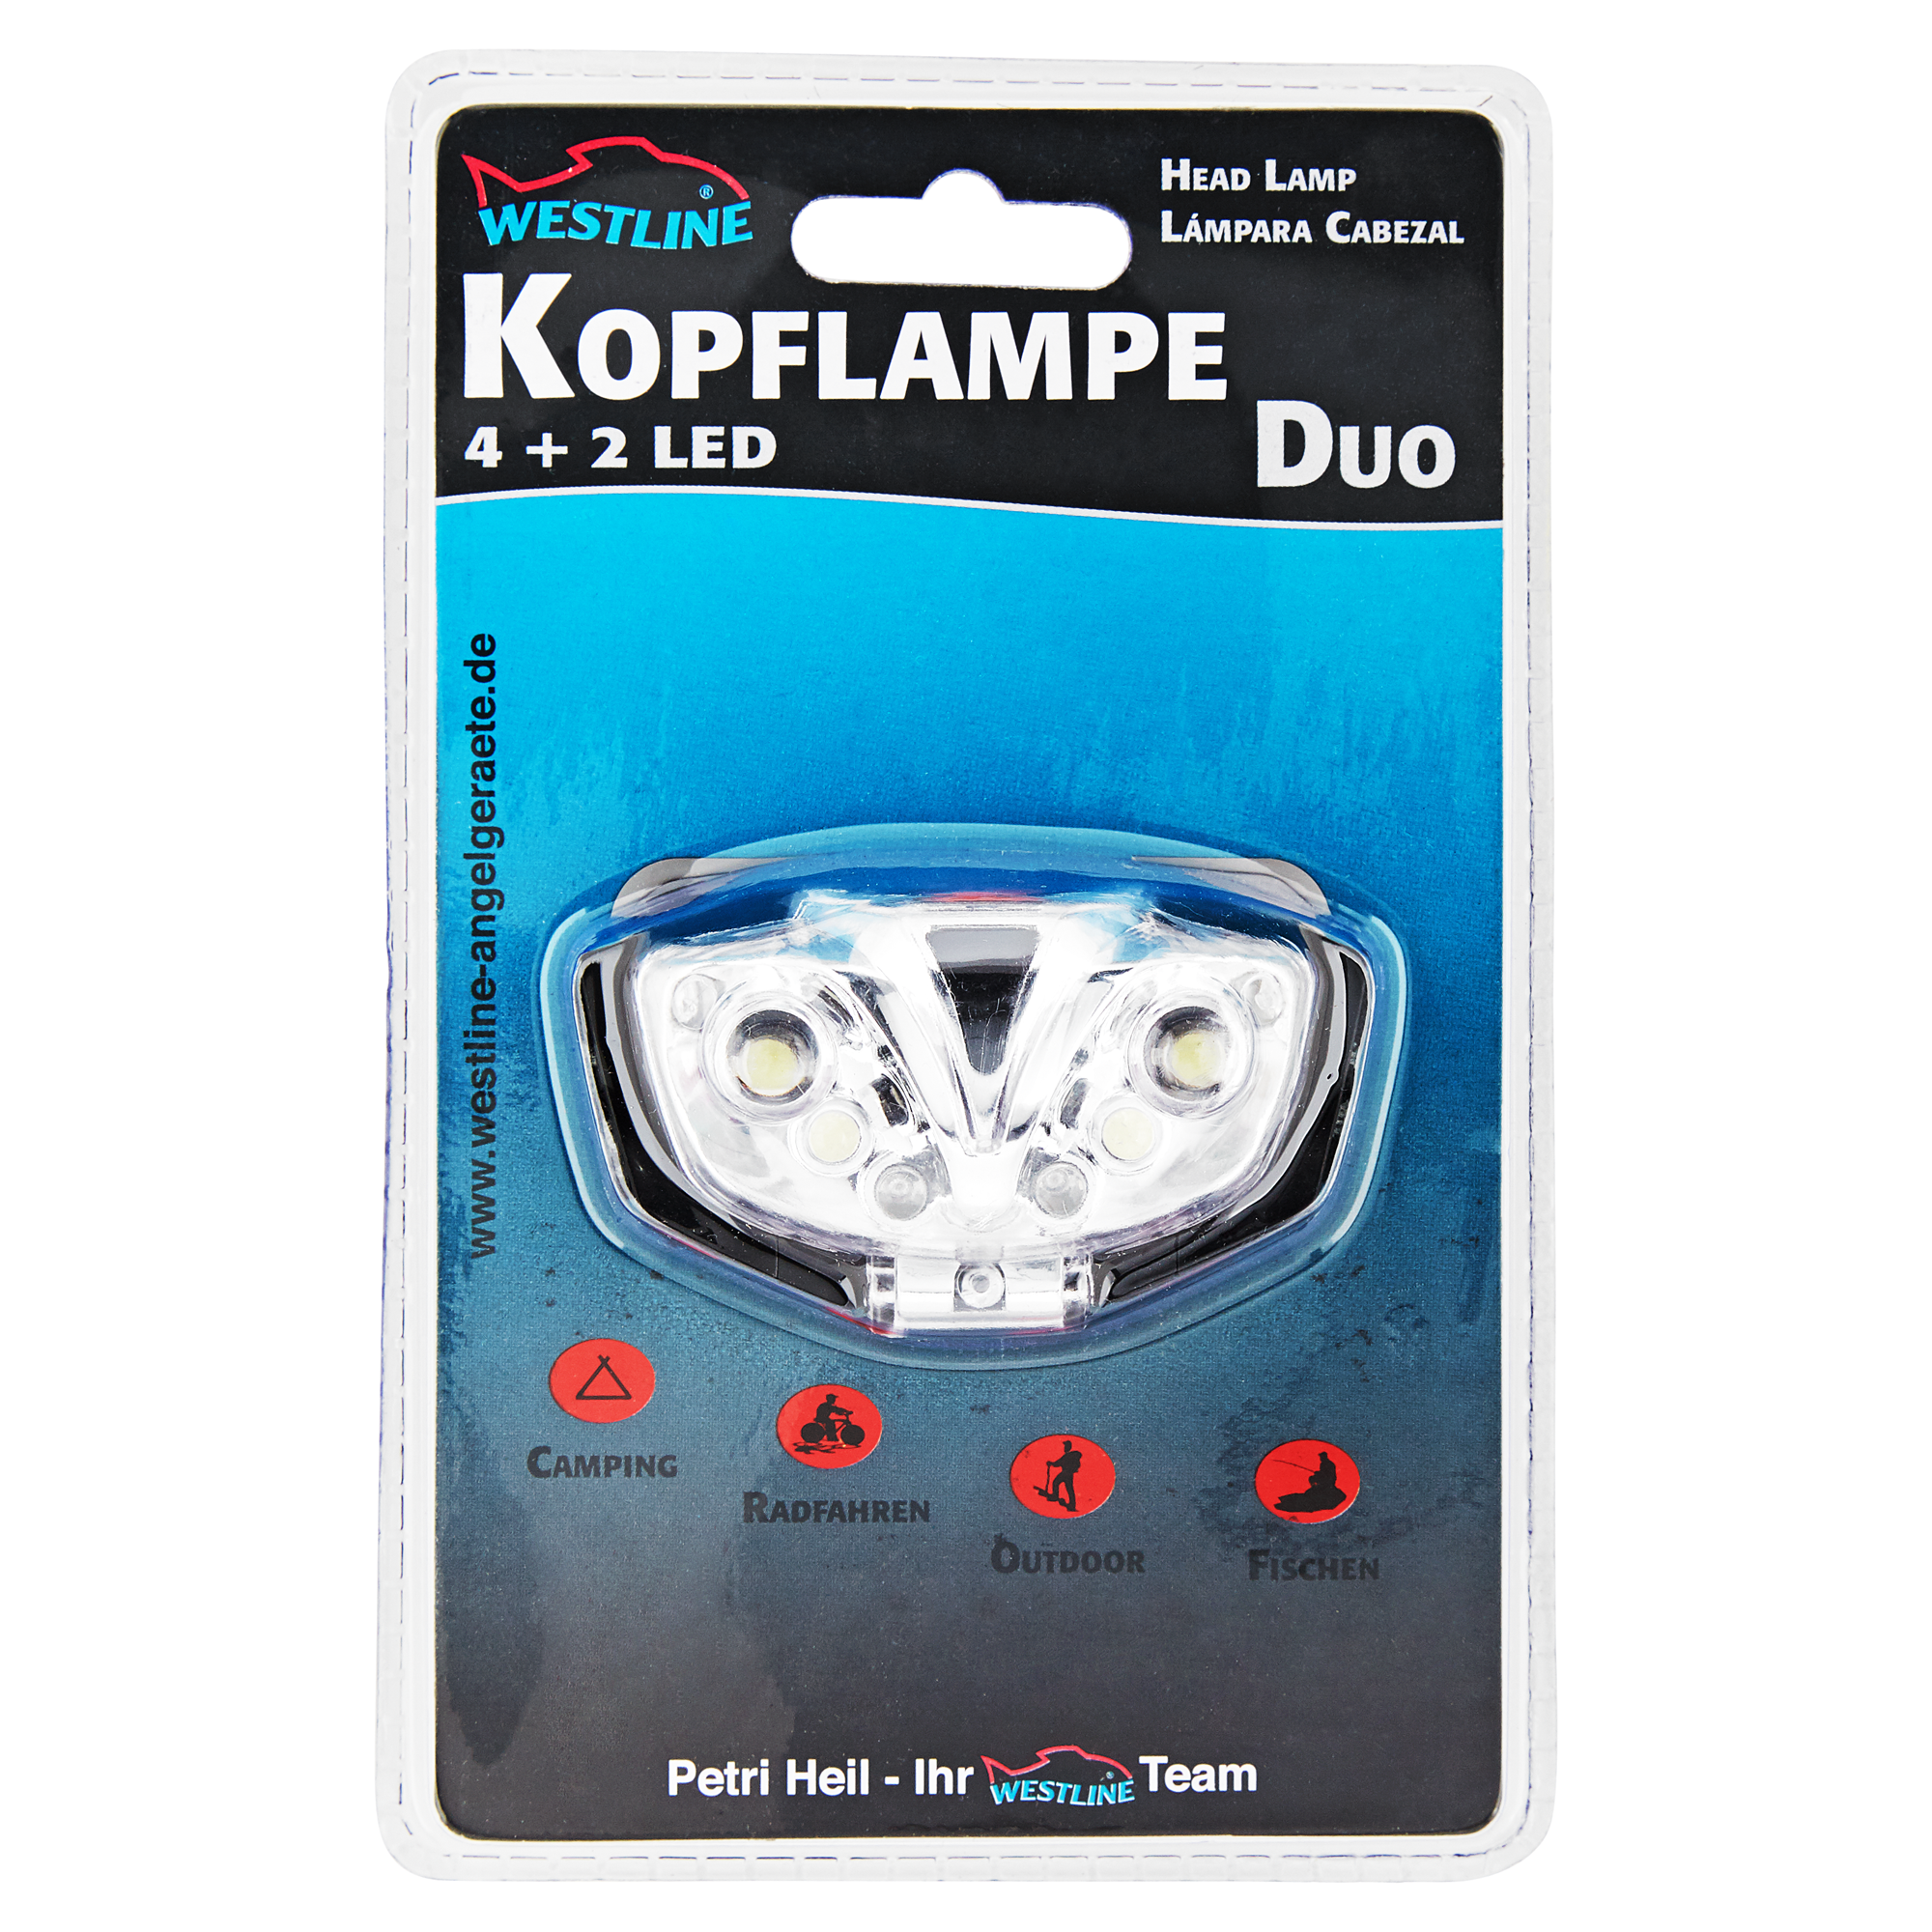 Kopflampe "Duo" + product picture